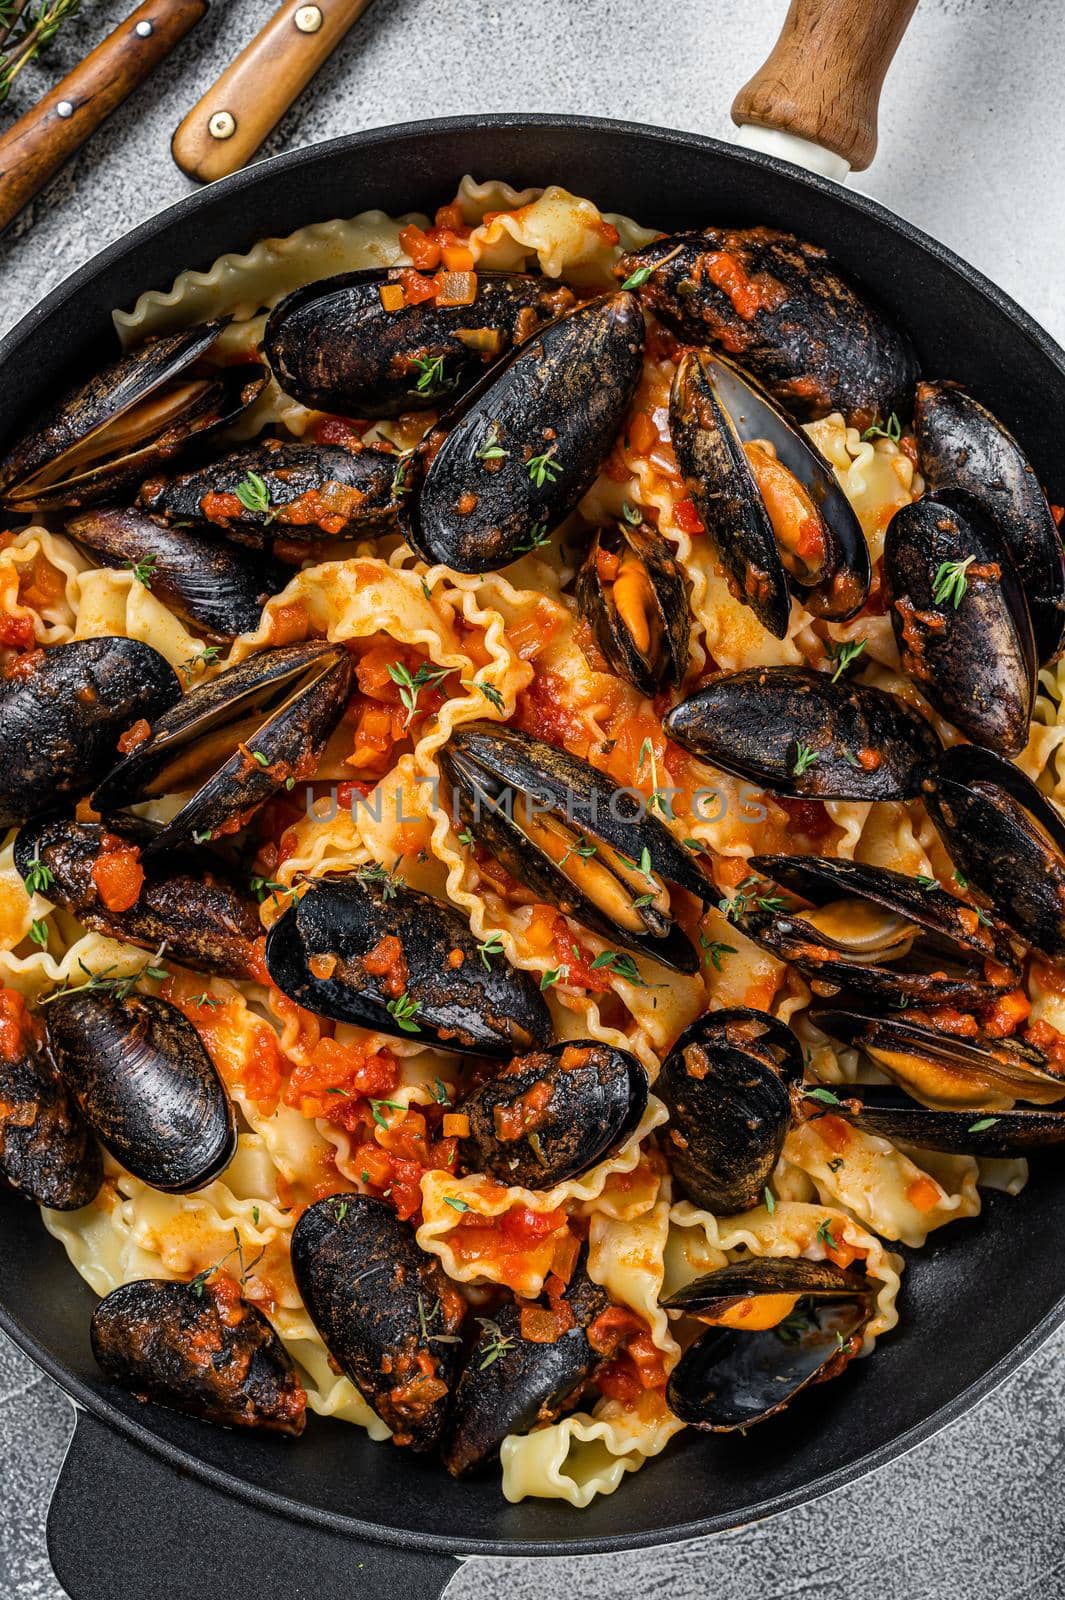 Traditional italian seafood pasta with mussels, Spaghetti and tomato sauce. White background. Top view.